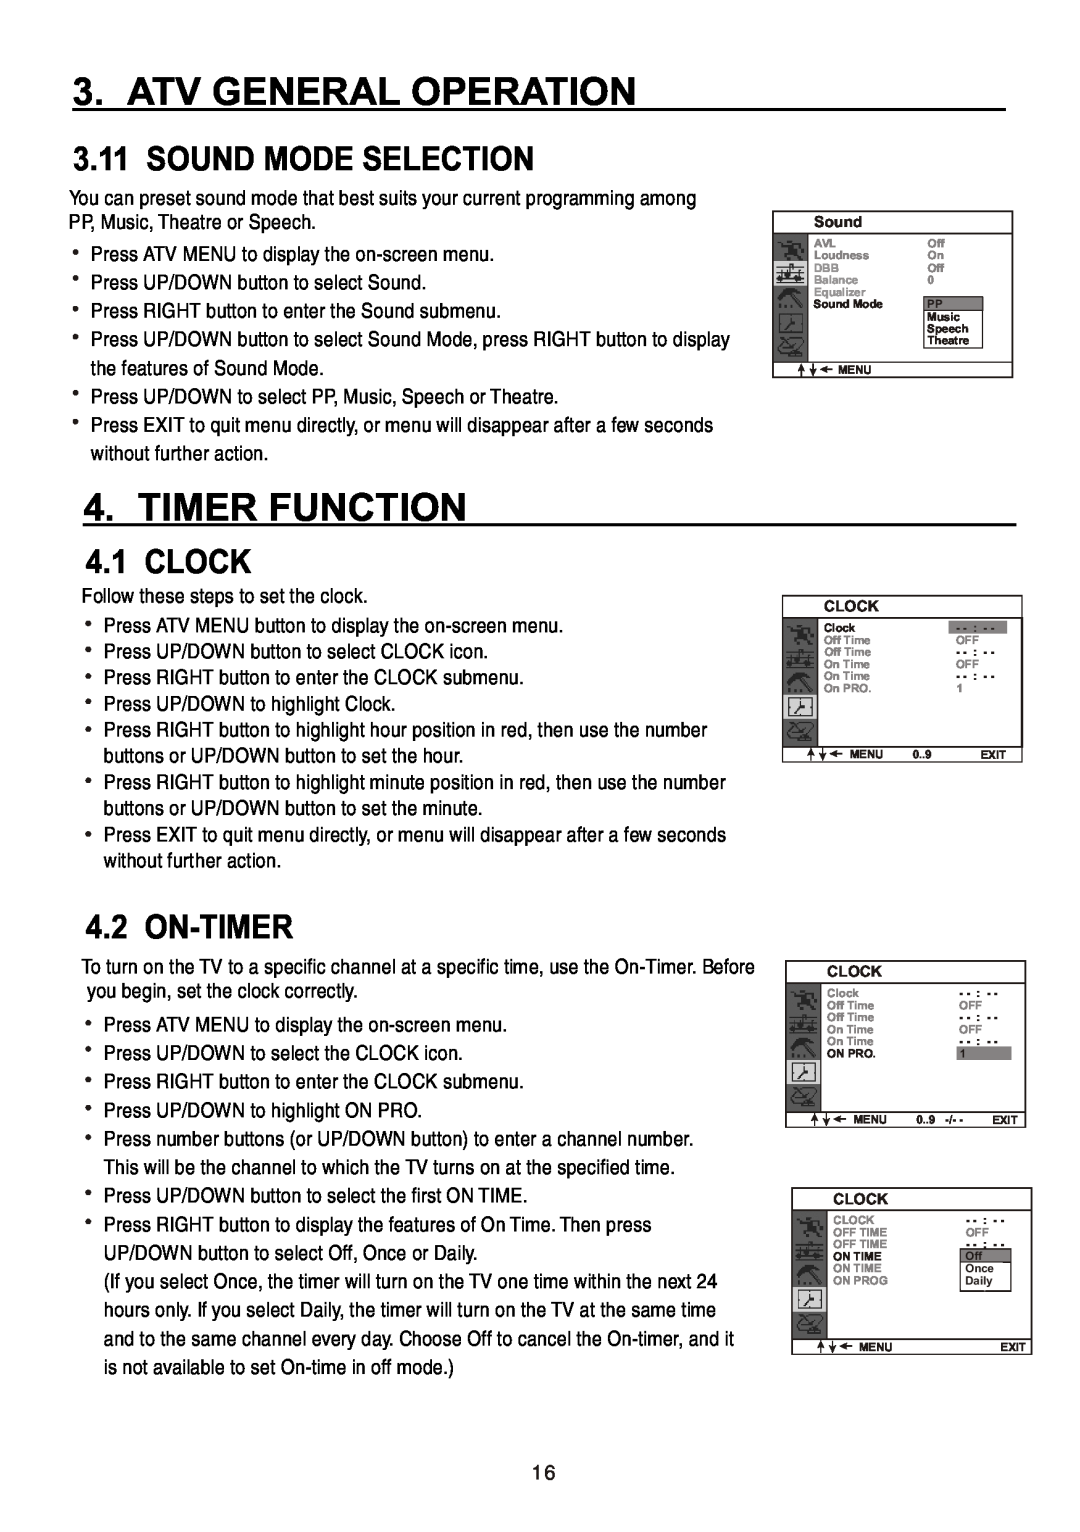 Teac CT-W32ID owner manual Timer Function, Sound Mode Selection, Clock, On-Timer, Atv General Operation 